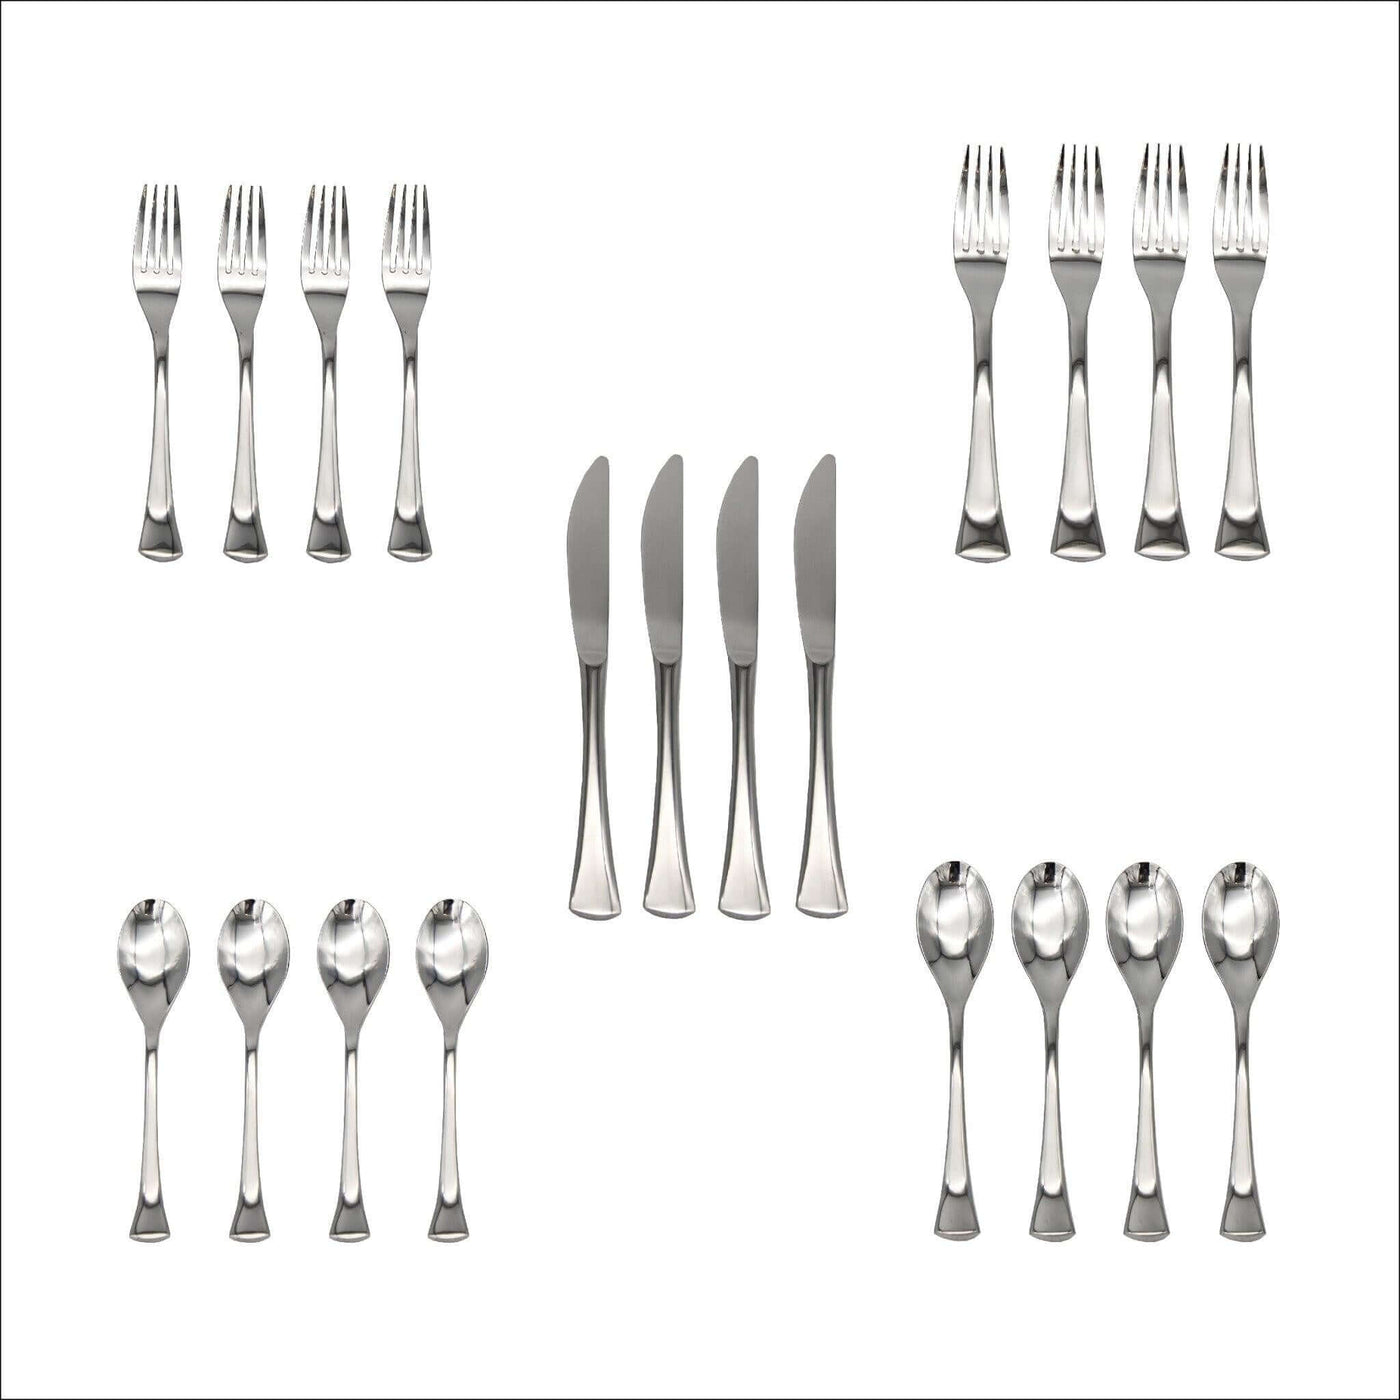 KitchenTrend 20-piece Stainless Steel Silverware Set (Service for 4) Marcel